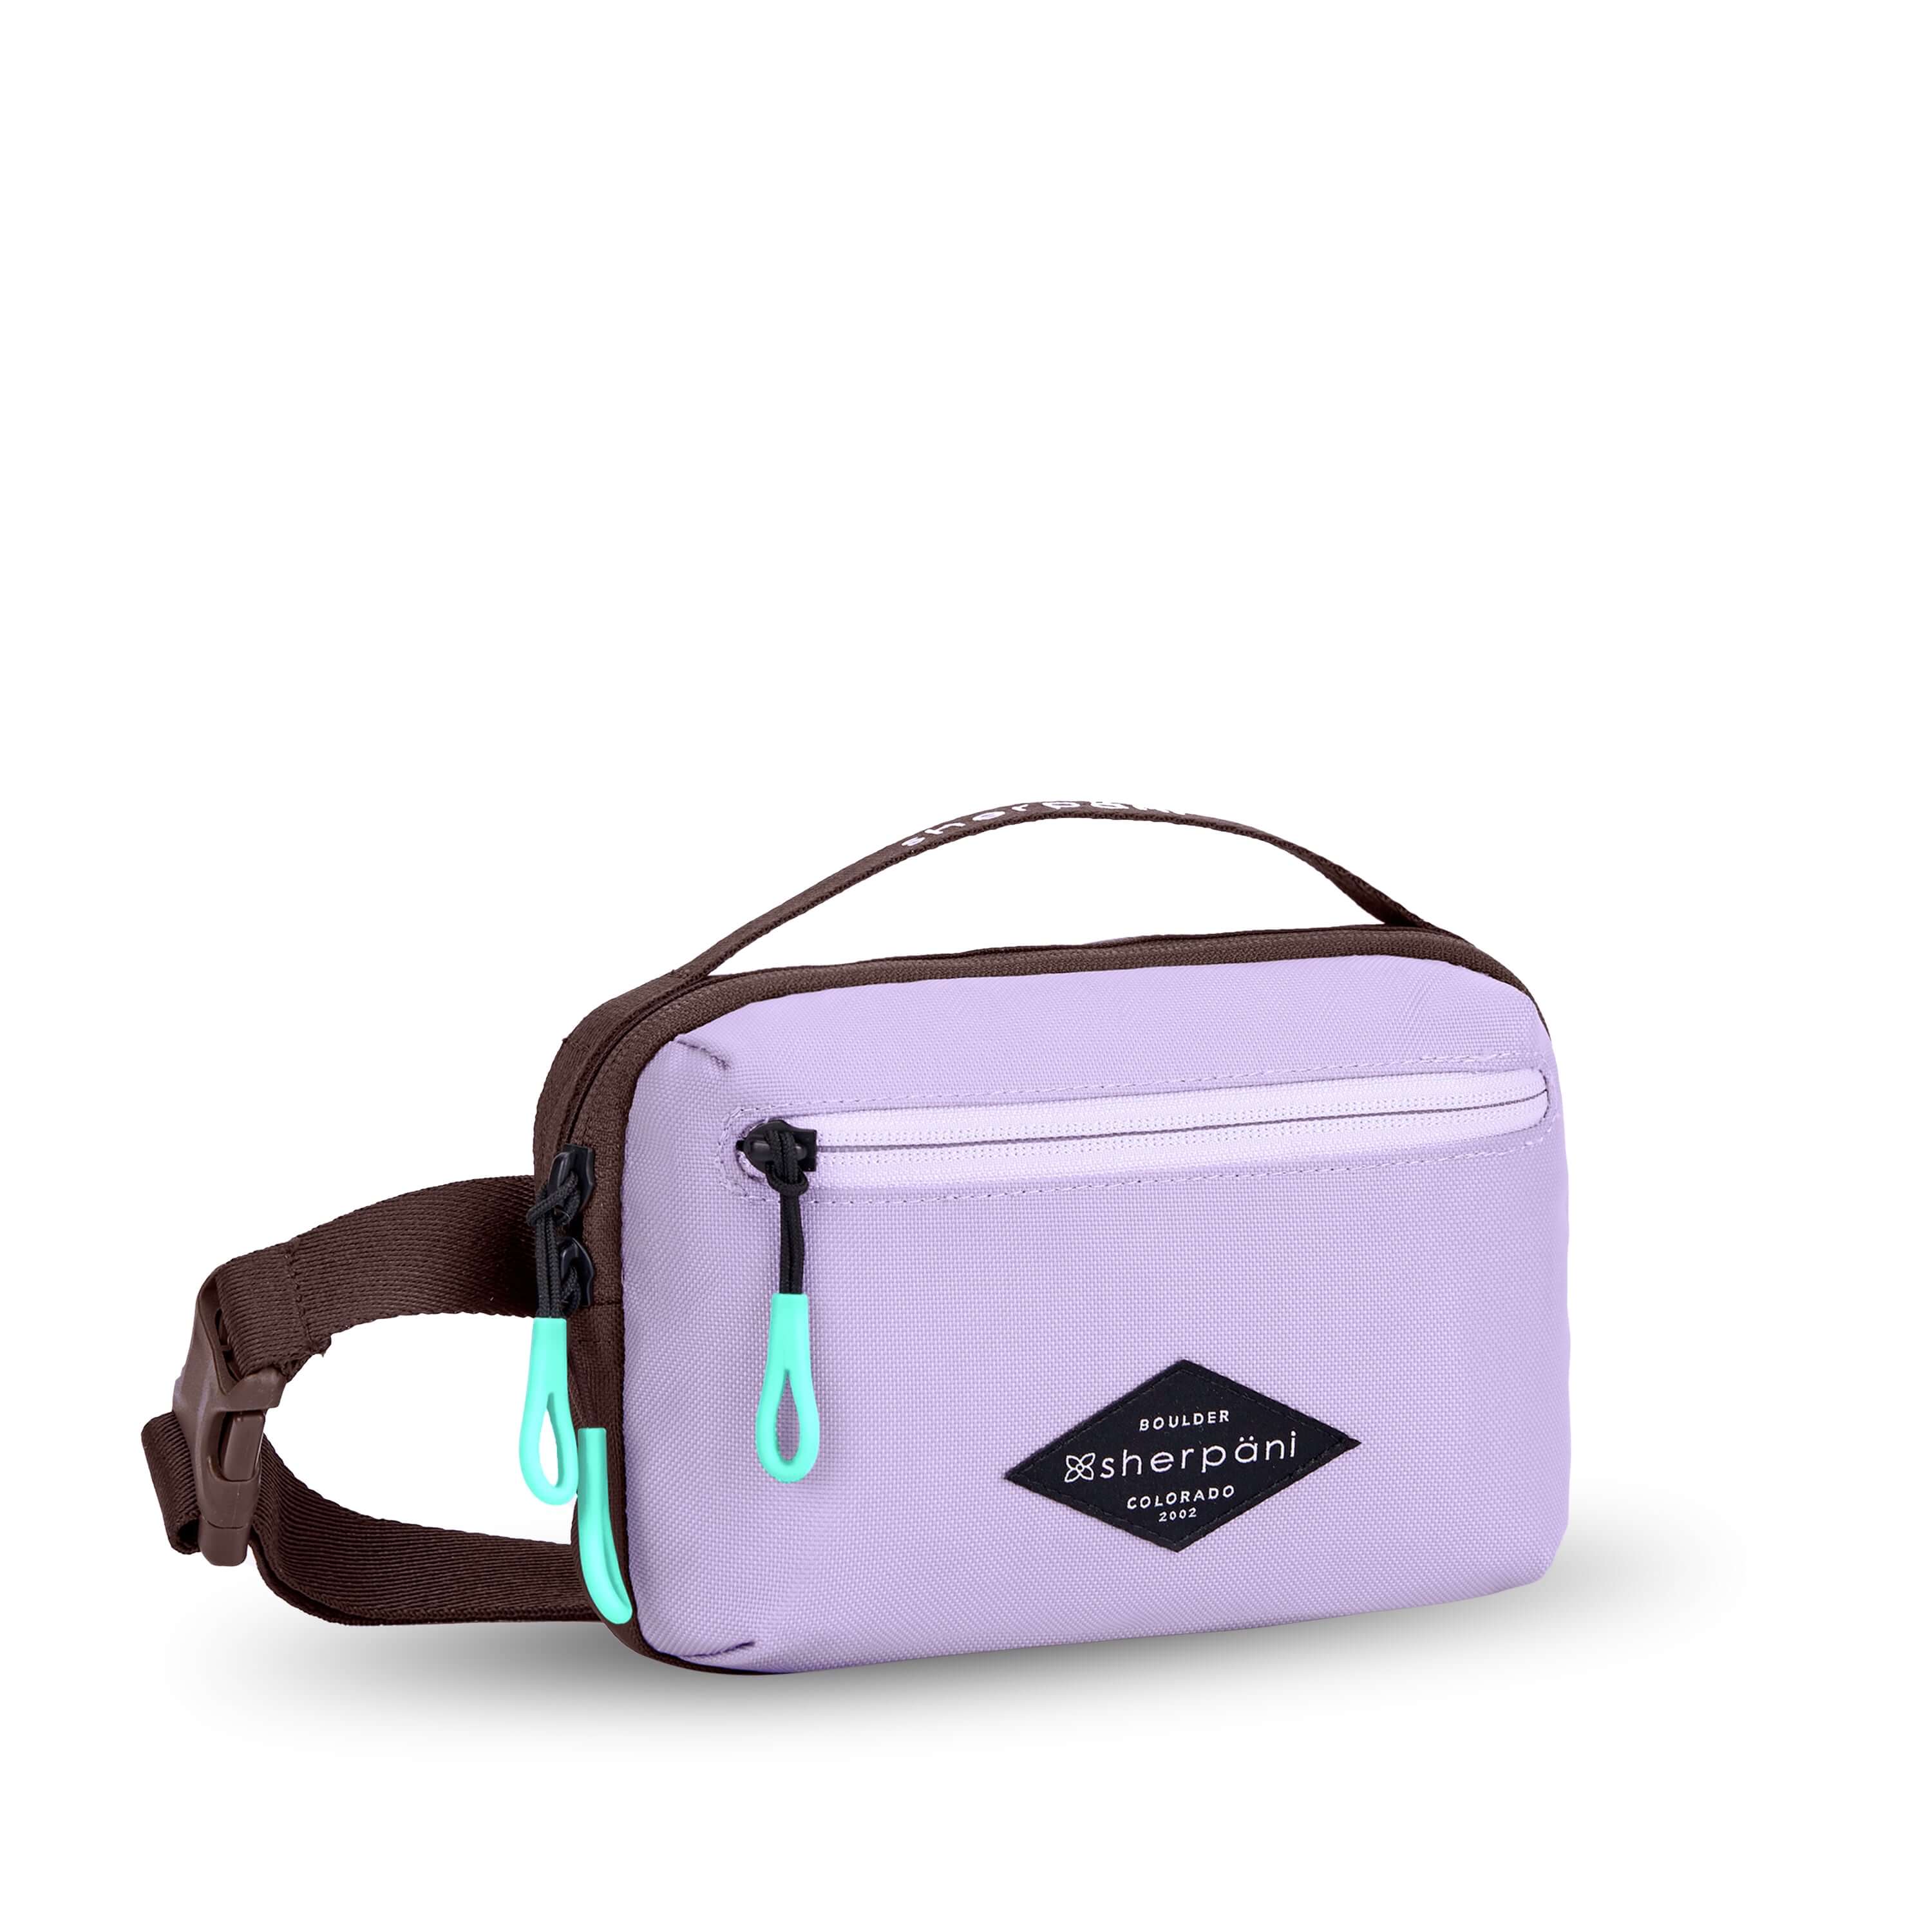 Angled front view of Sherpani’s fanny pack, the Hyk in Lavender. The bag is two-toned, the front half is lavender and the back half is brown. There is an external zipper pocket on the front of the bag. Easy-pull zippers are accented in aqua. The fanny pack features an adjustable strap with a buckle.